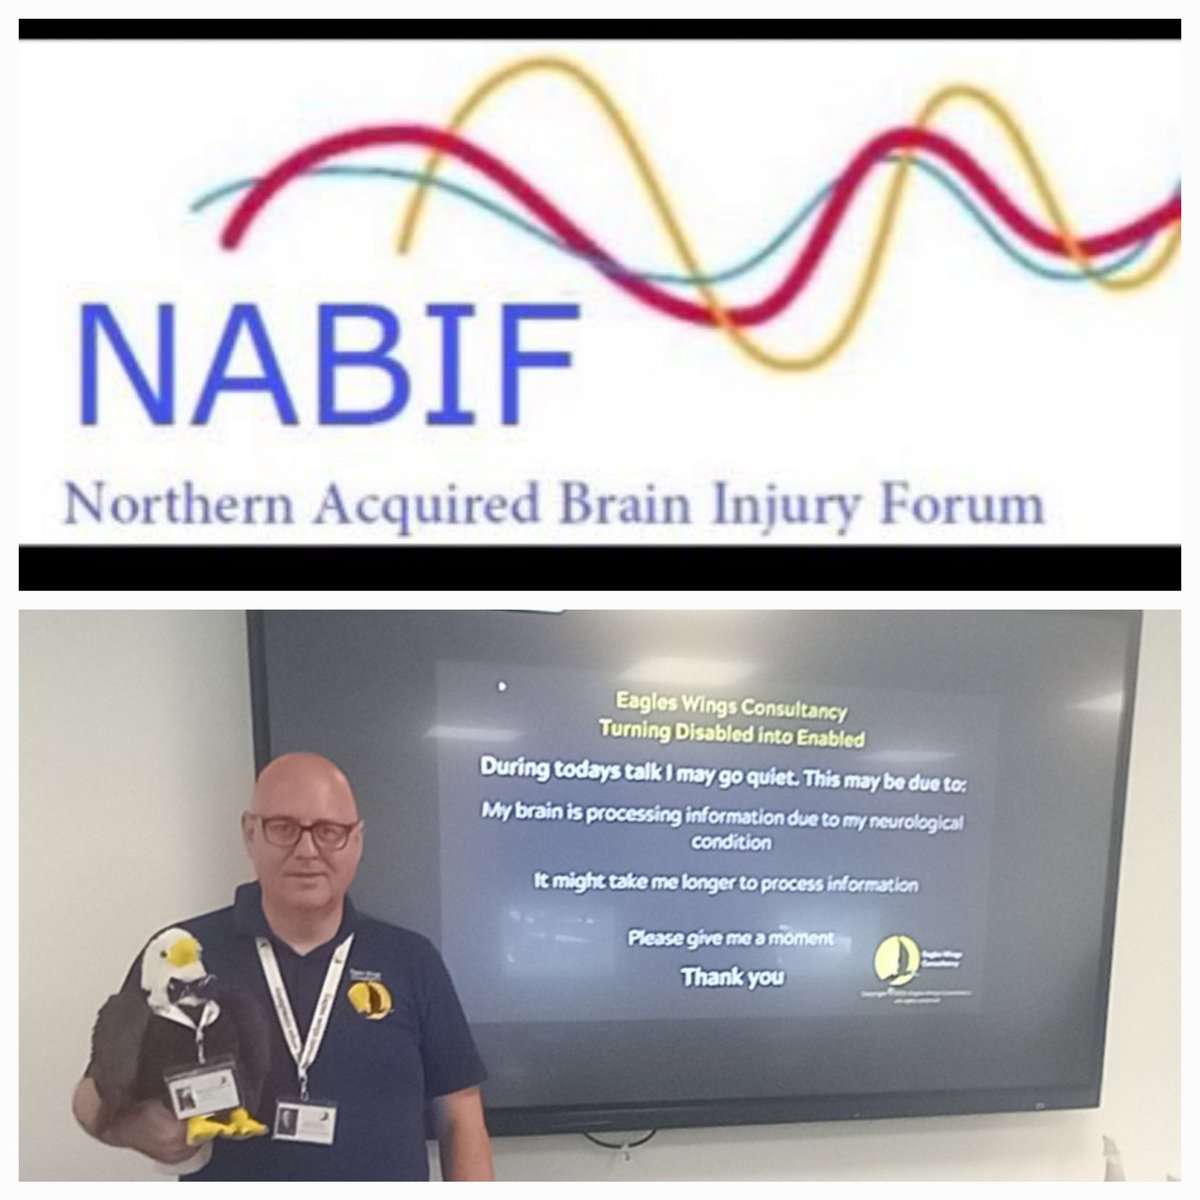 John and Ernie the Eagle enjoyed networking, learning and speaking at the NABIF meeting in Sunderland today, we enjoyed the inspirational talk by Speach Therapy North East.
lnkd.in/gD-JXbFj
#ABI #BrainInjury #Inclusion 
eagleswingsconsultancy 
lnkd.in/eQU5XDSQ